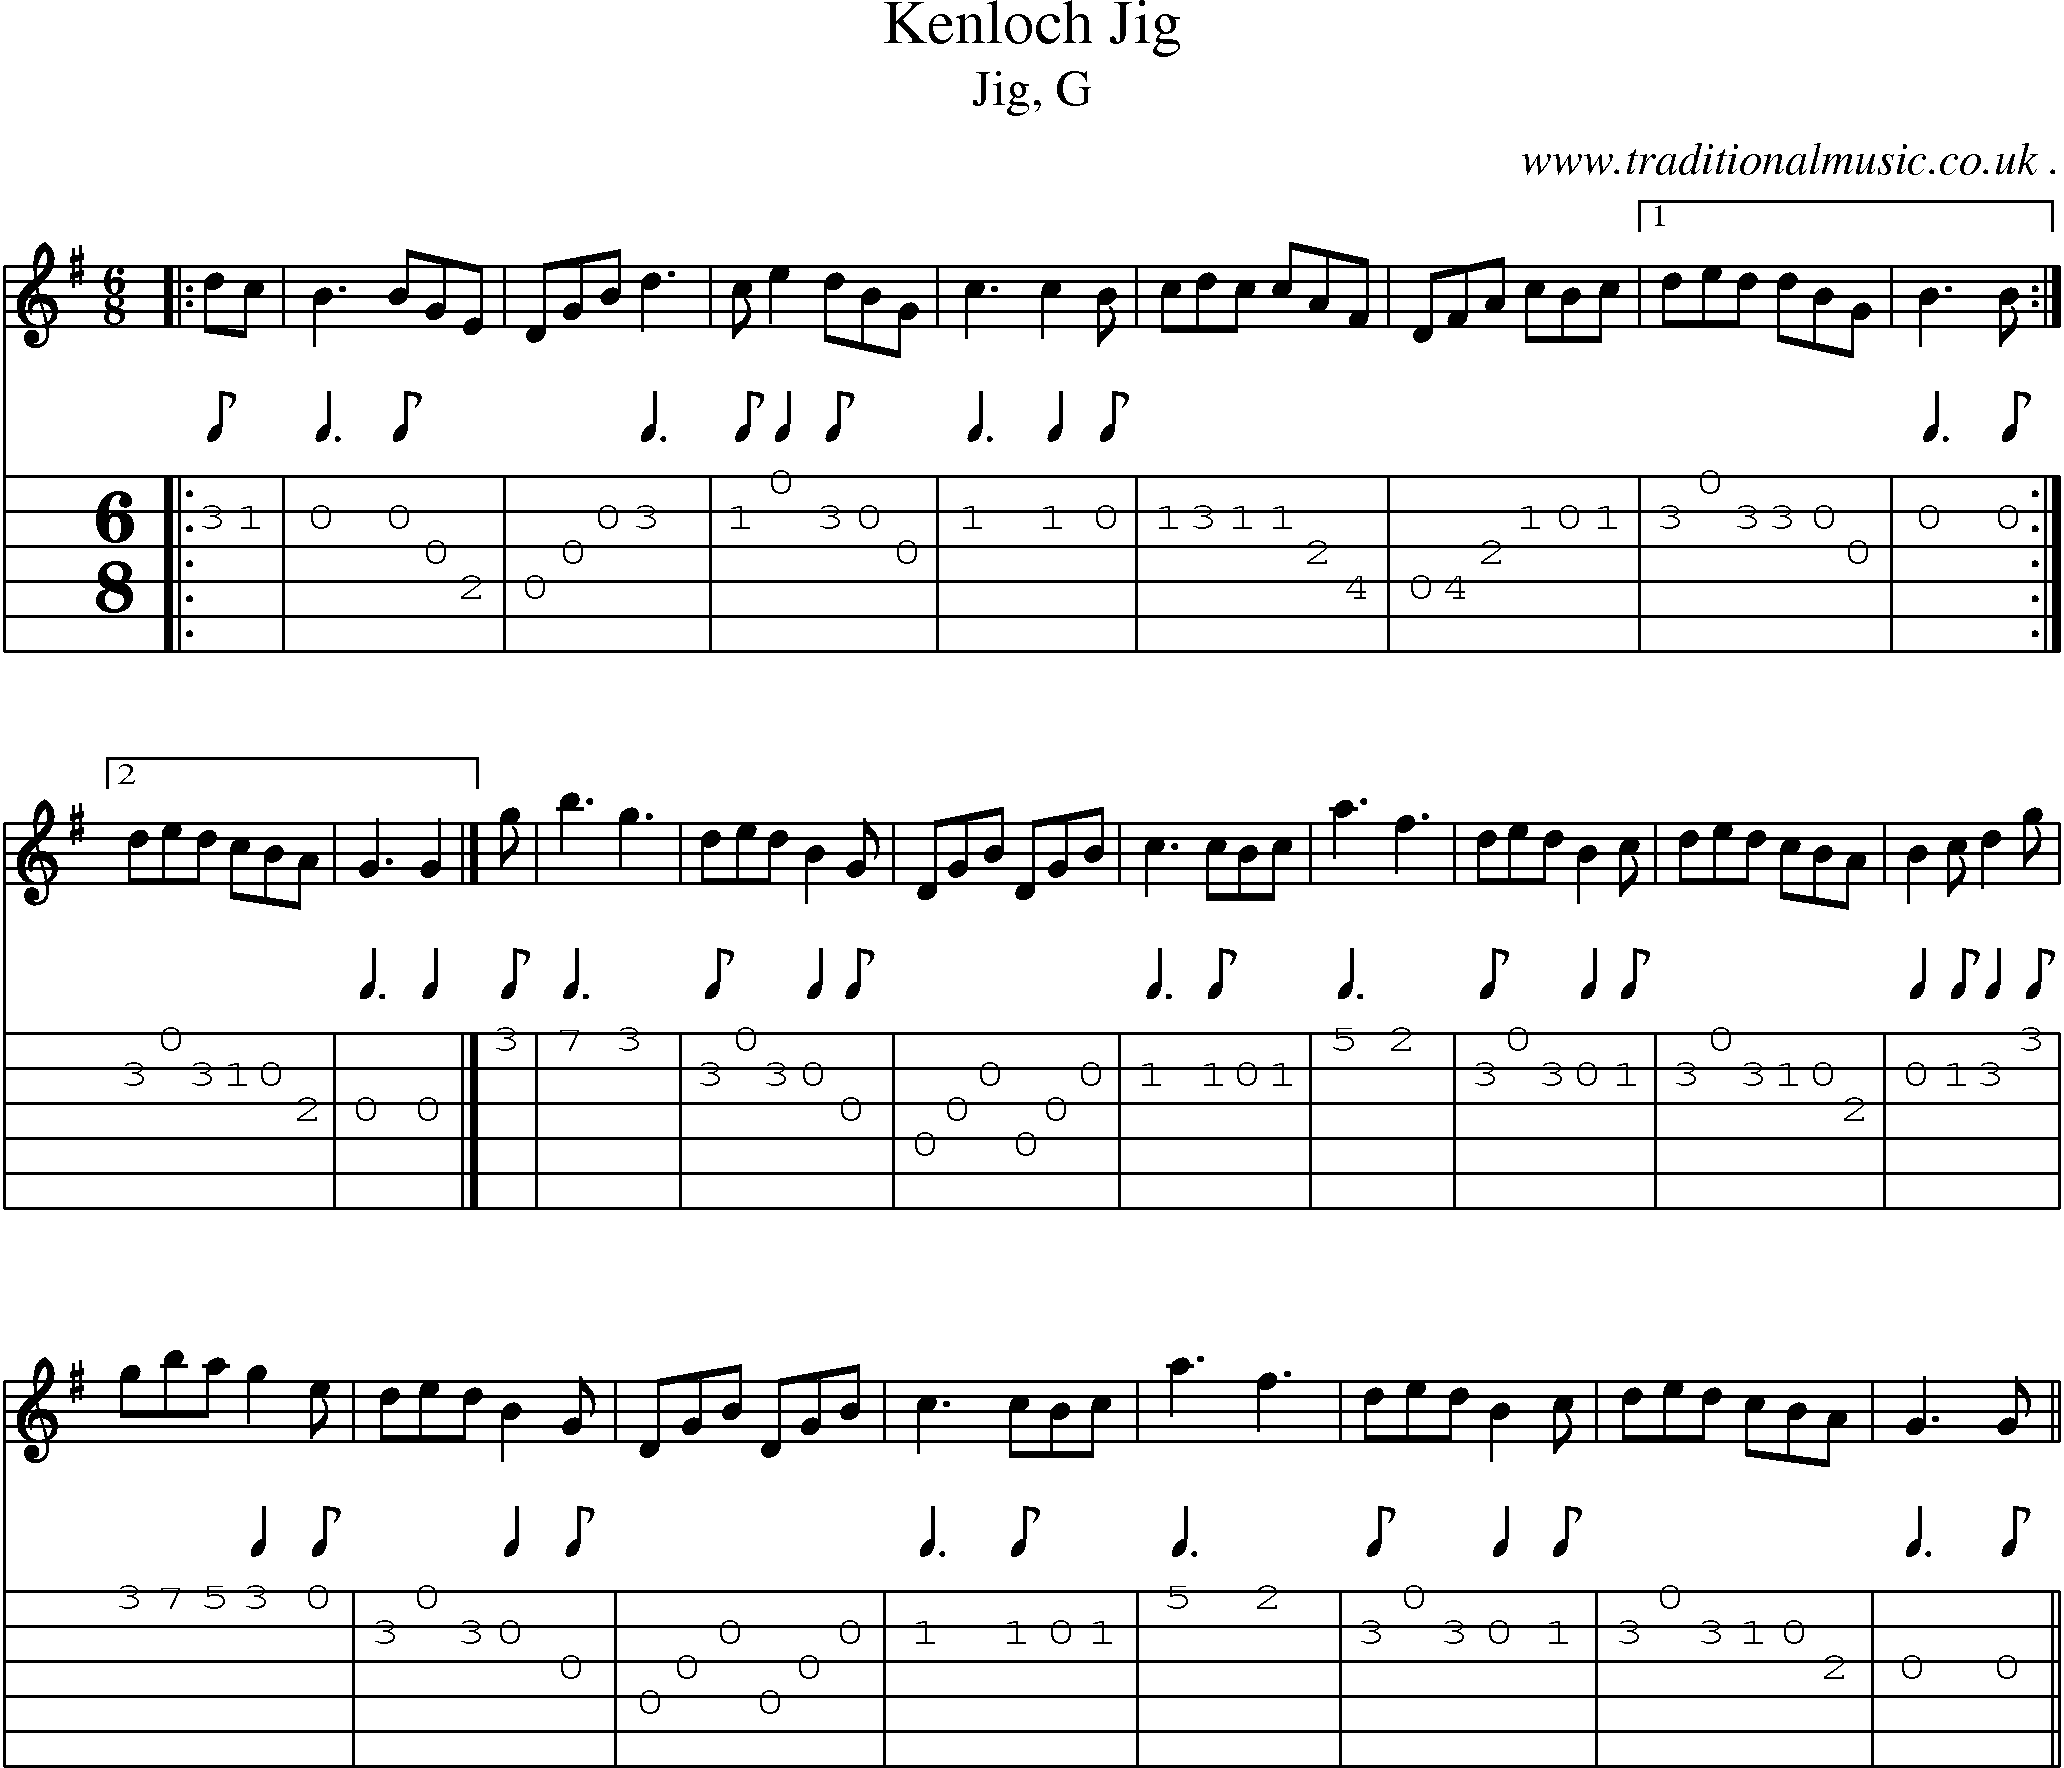 Sheet-music  score, Chords and Guitar Tabs for Kenloch Jig